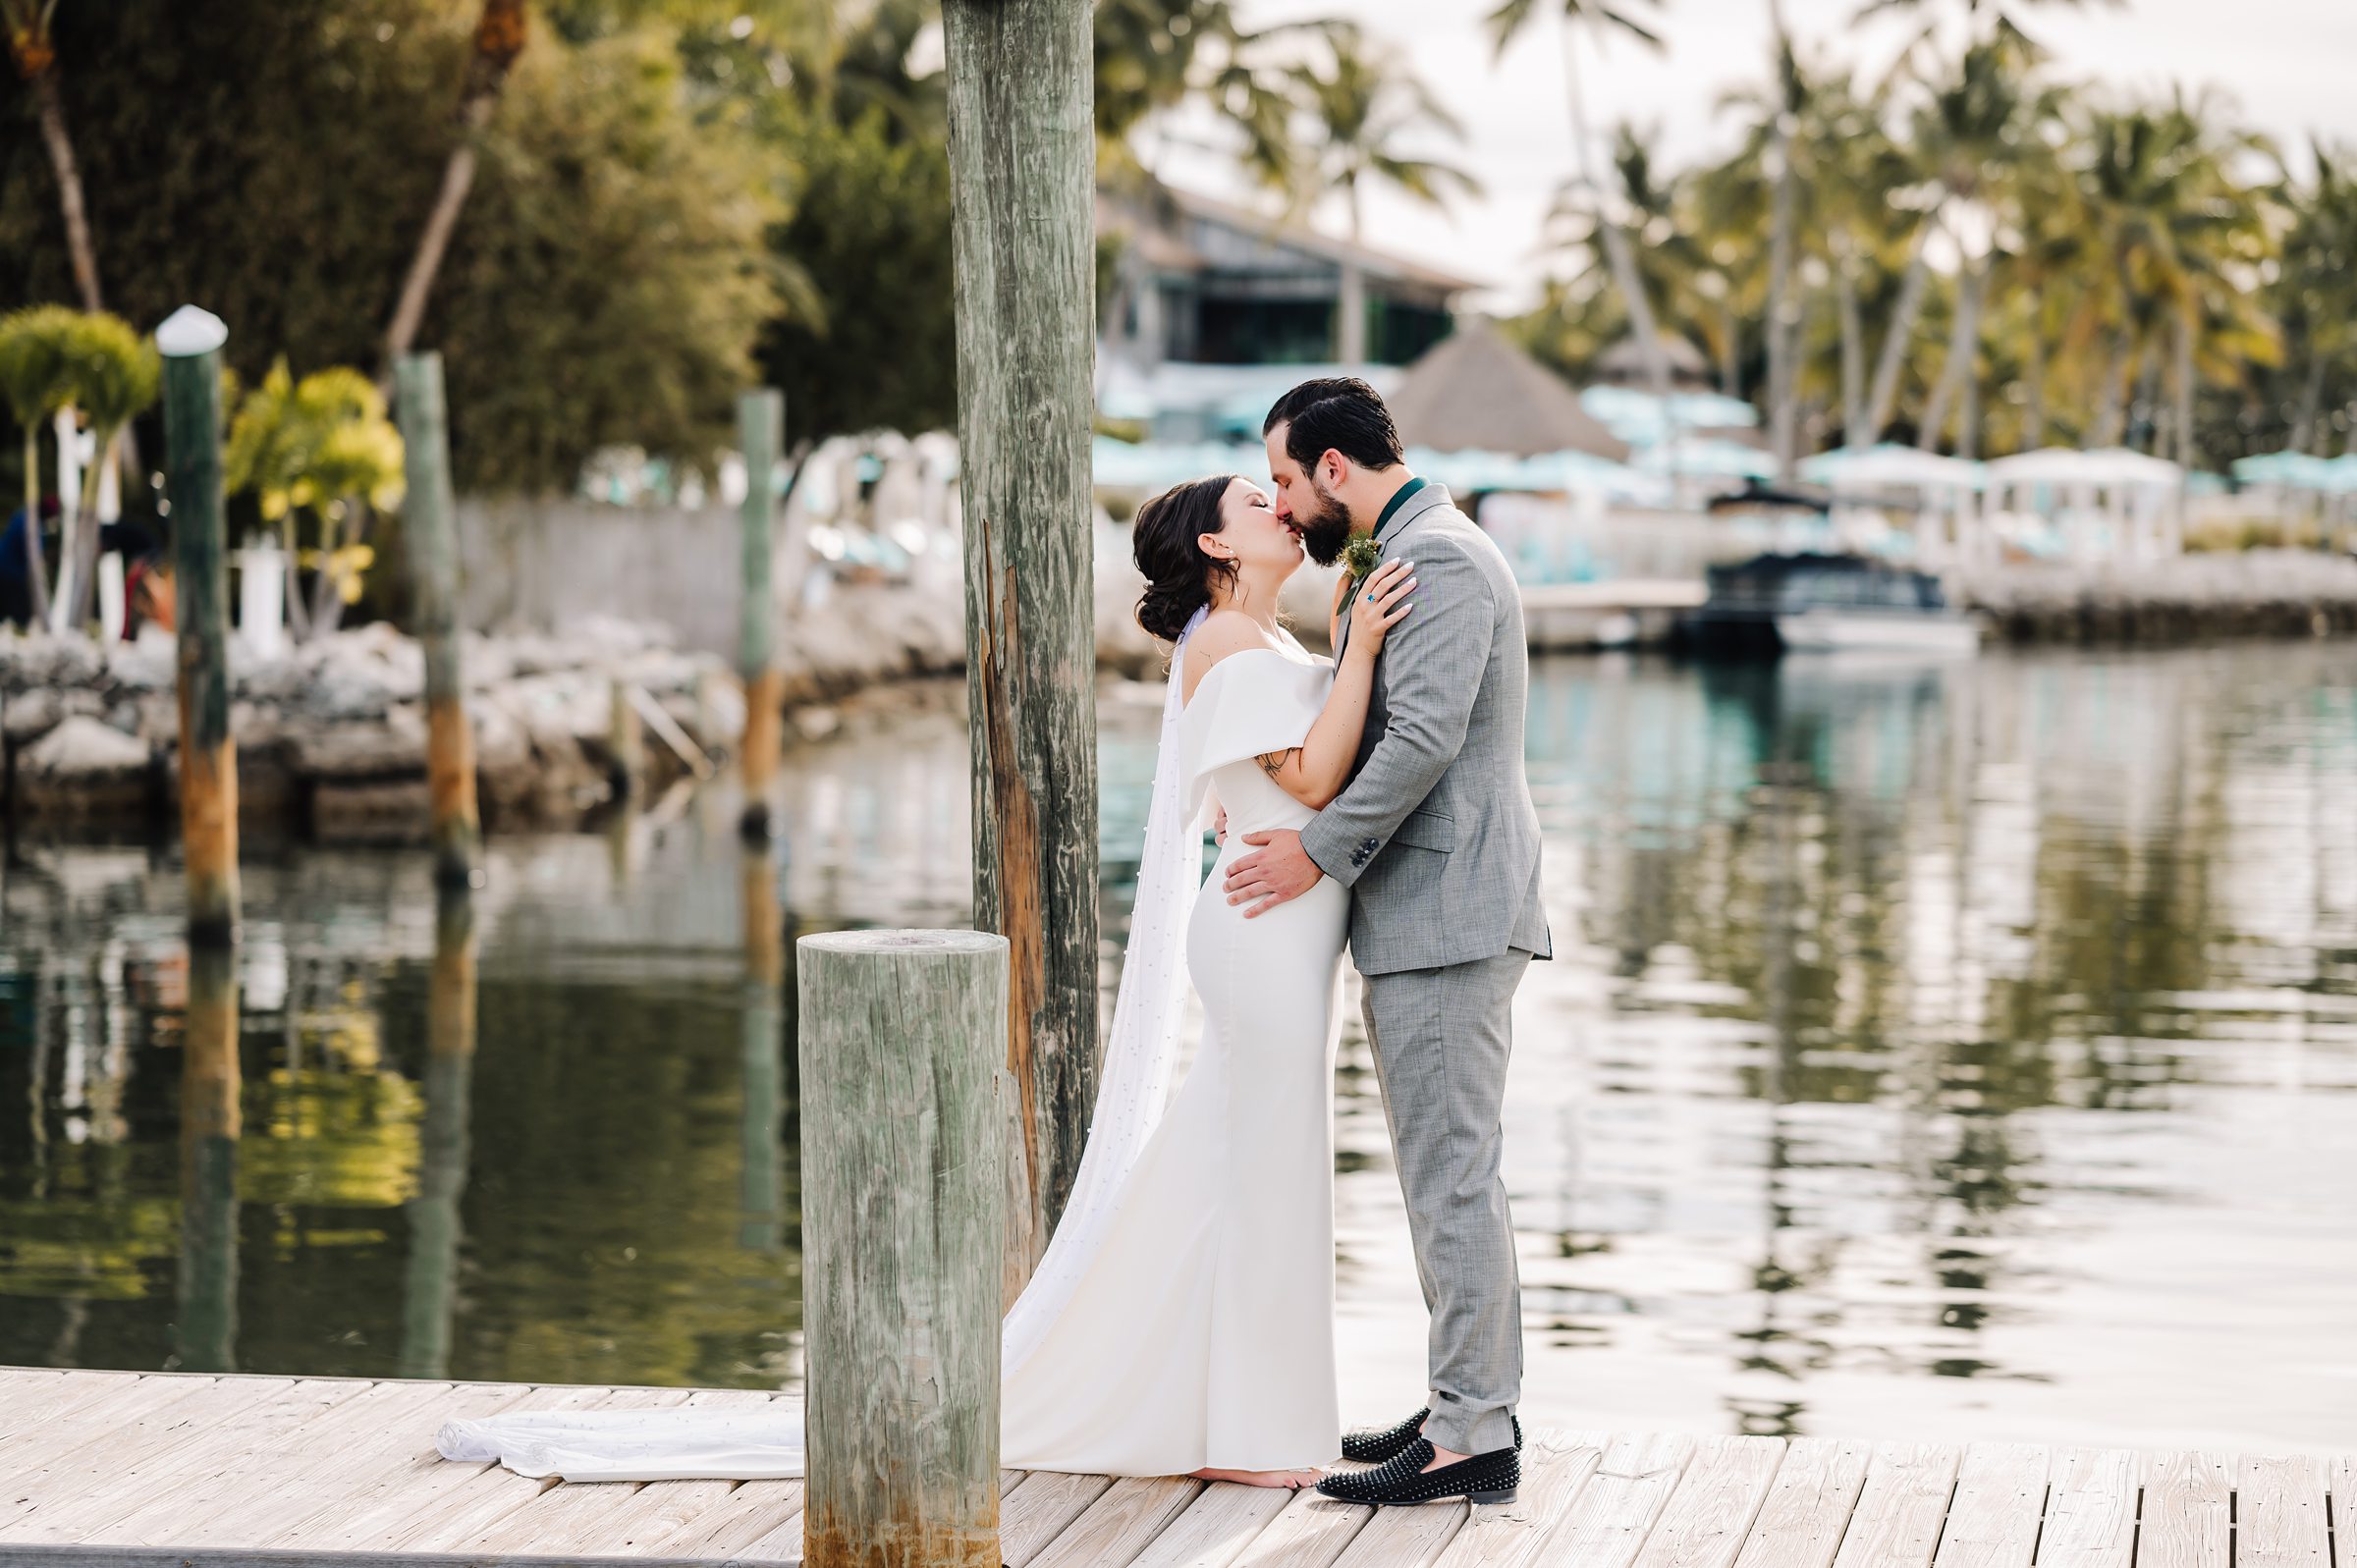 Bride and groom sharing a first look on the dock at Dream Bay Resort.